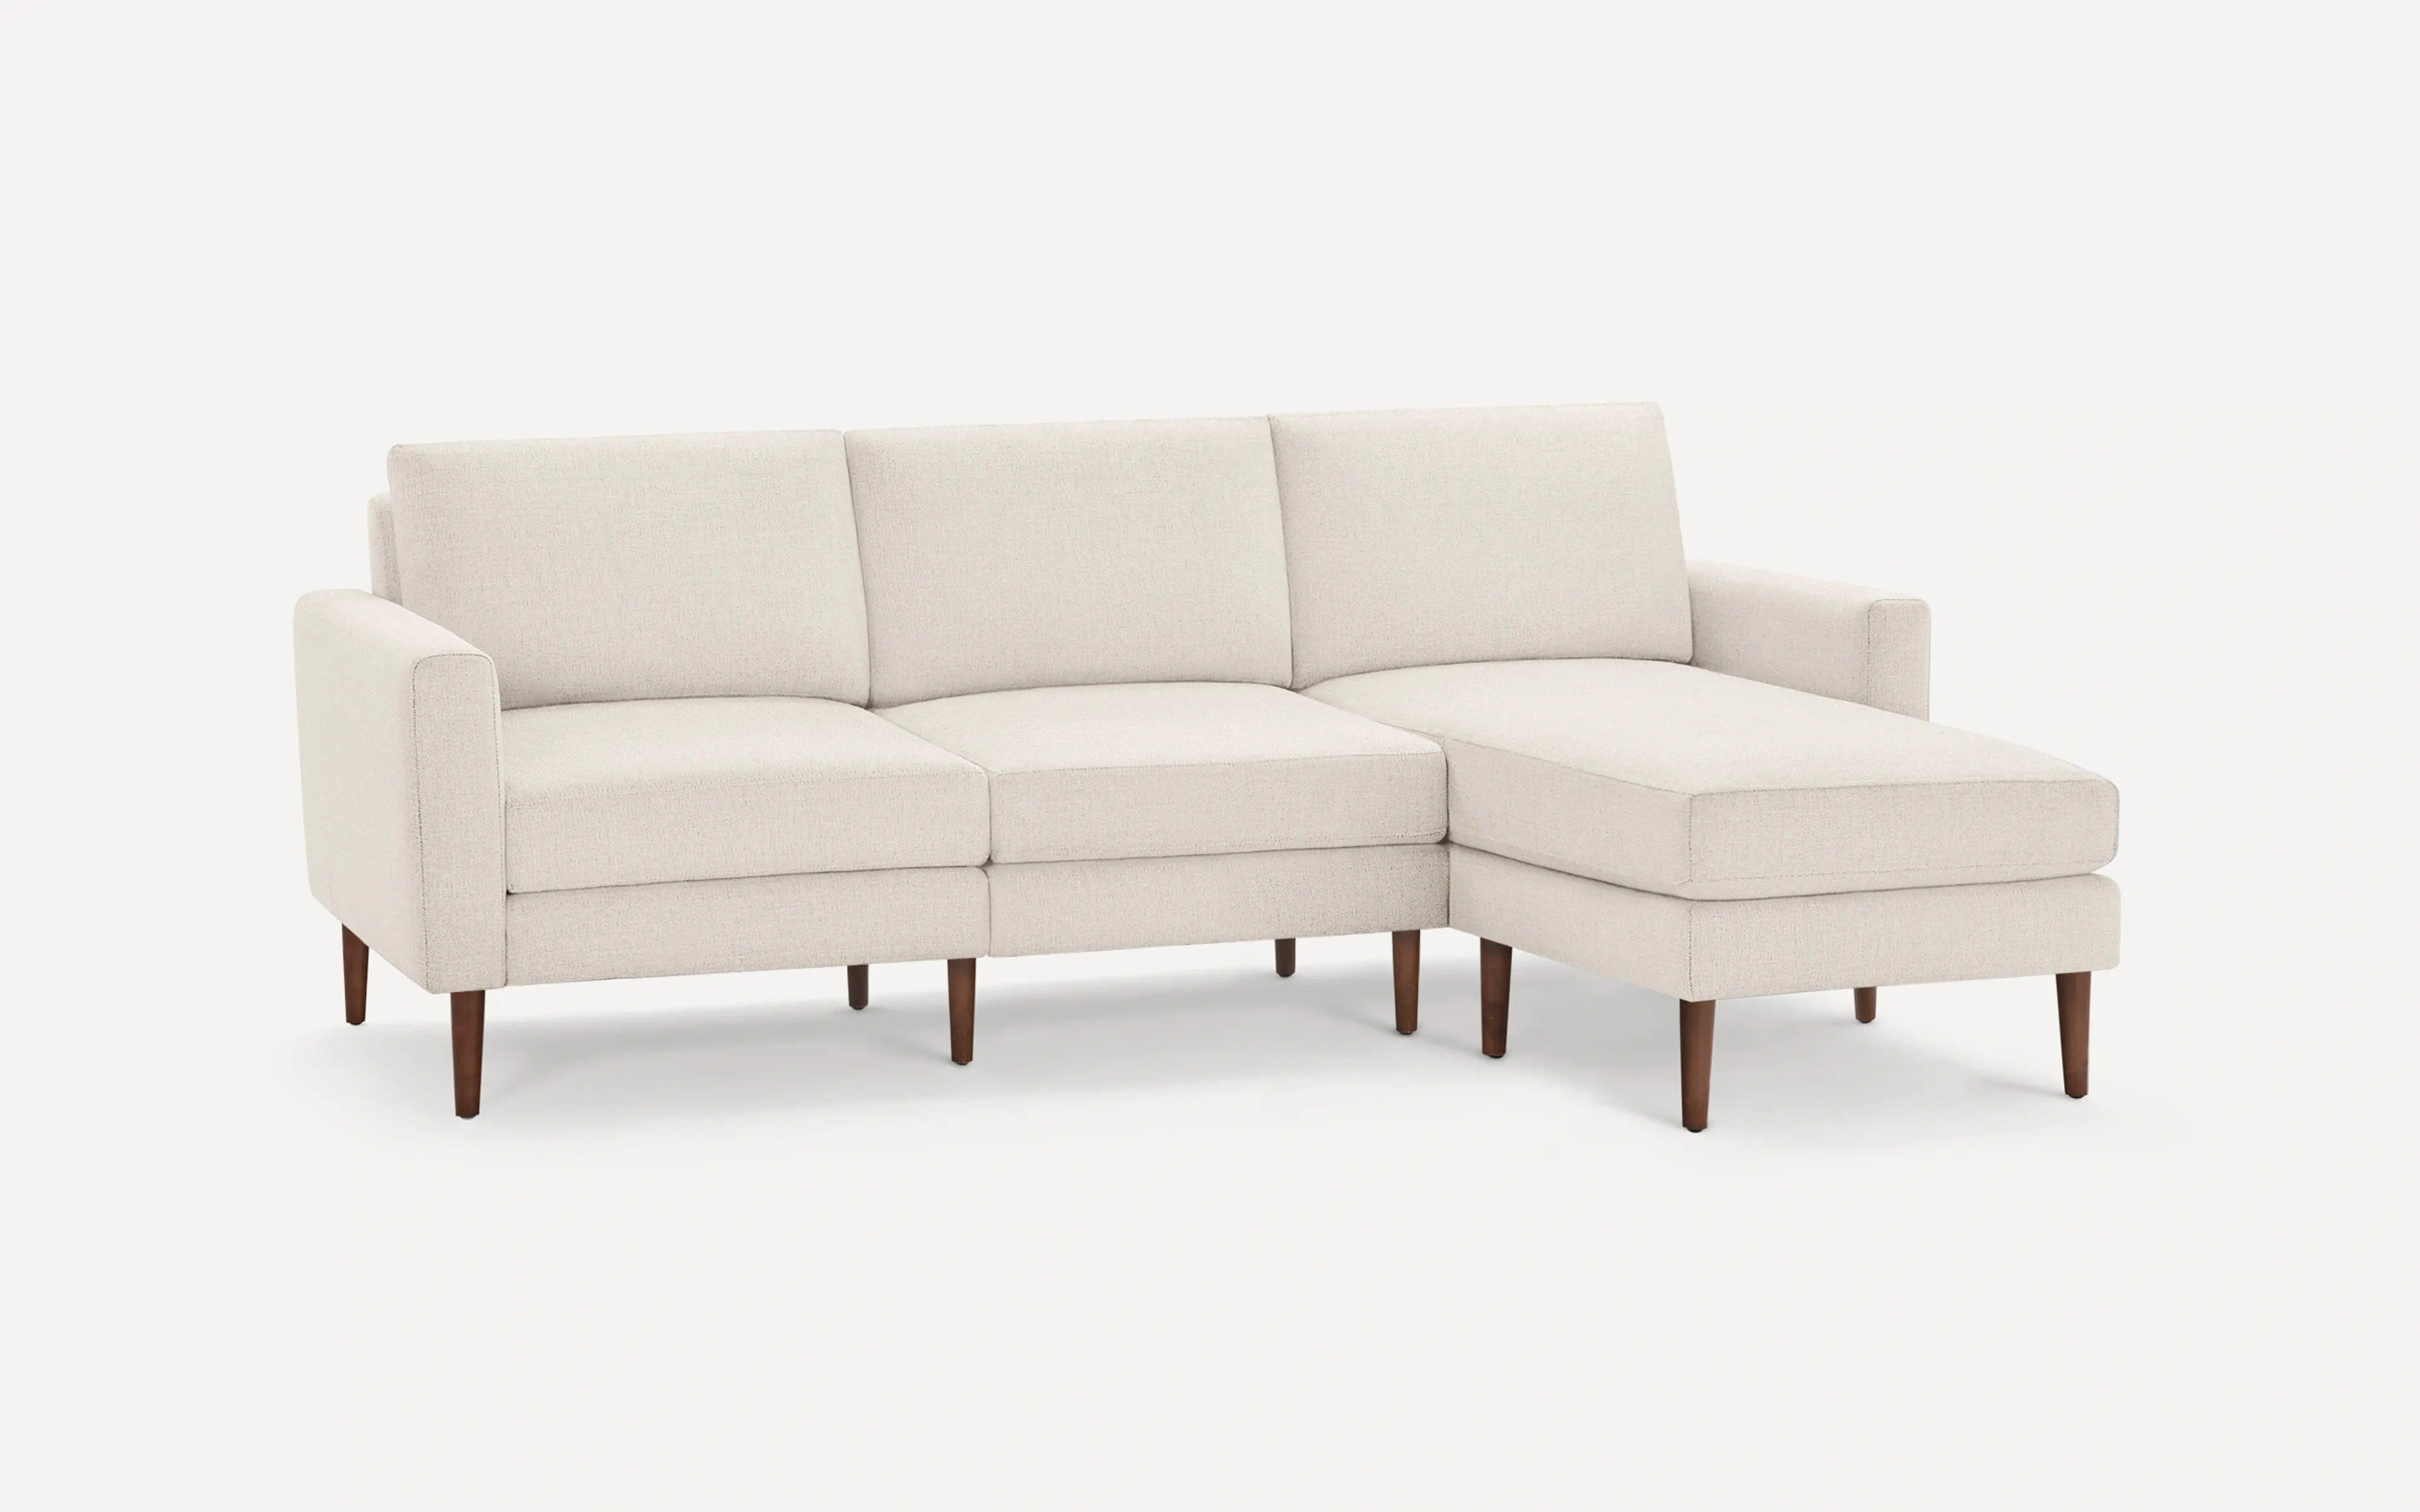 Original Nomad Chaise Sofa in Ivory Fabric